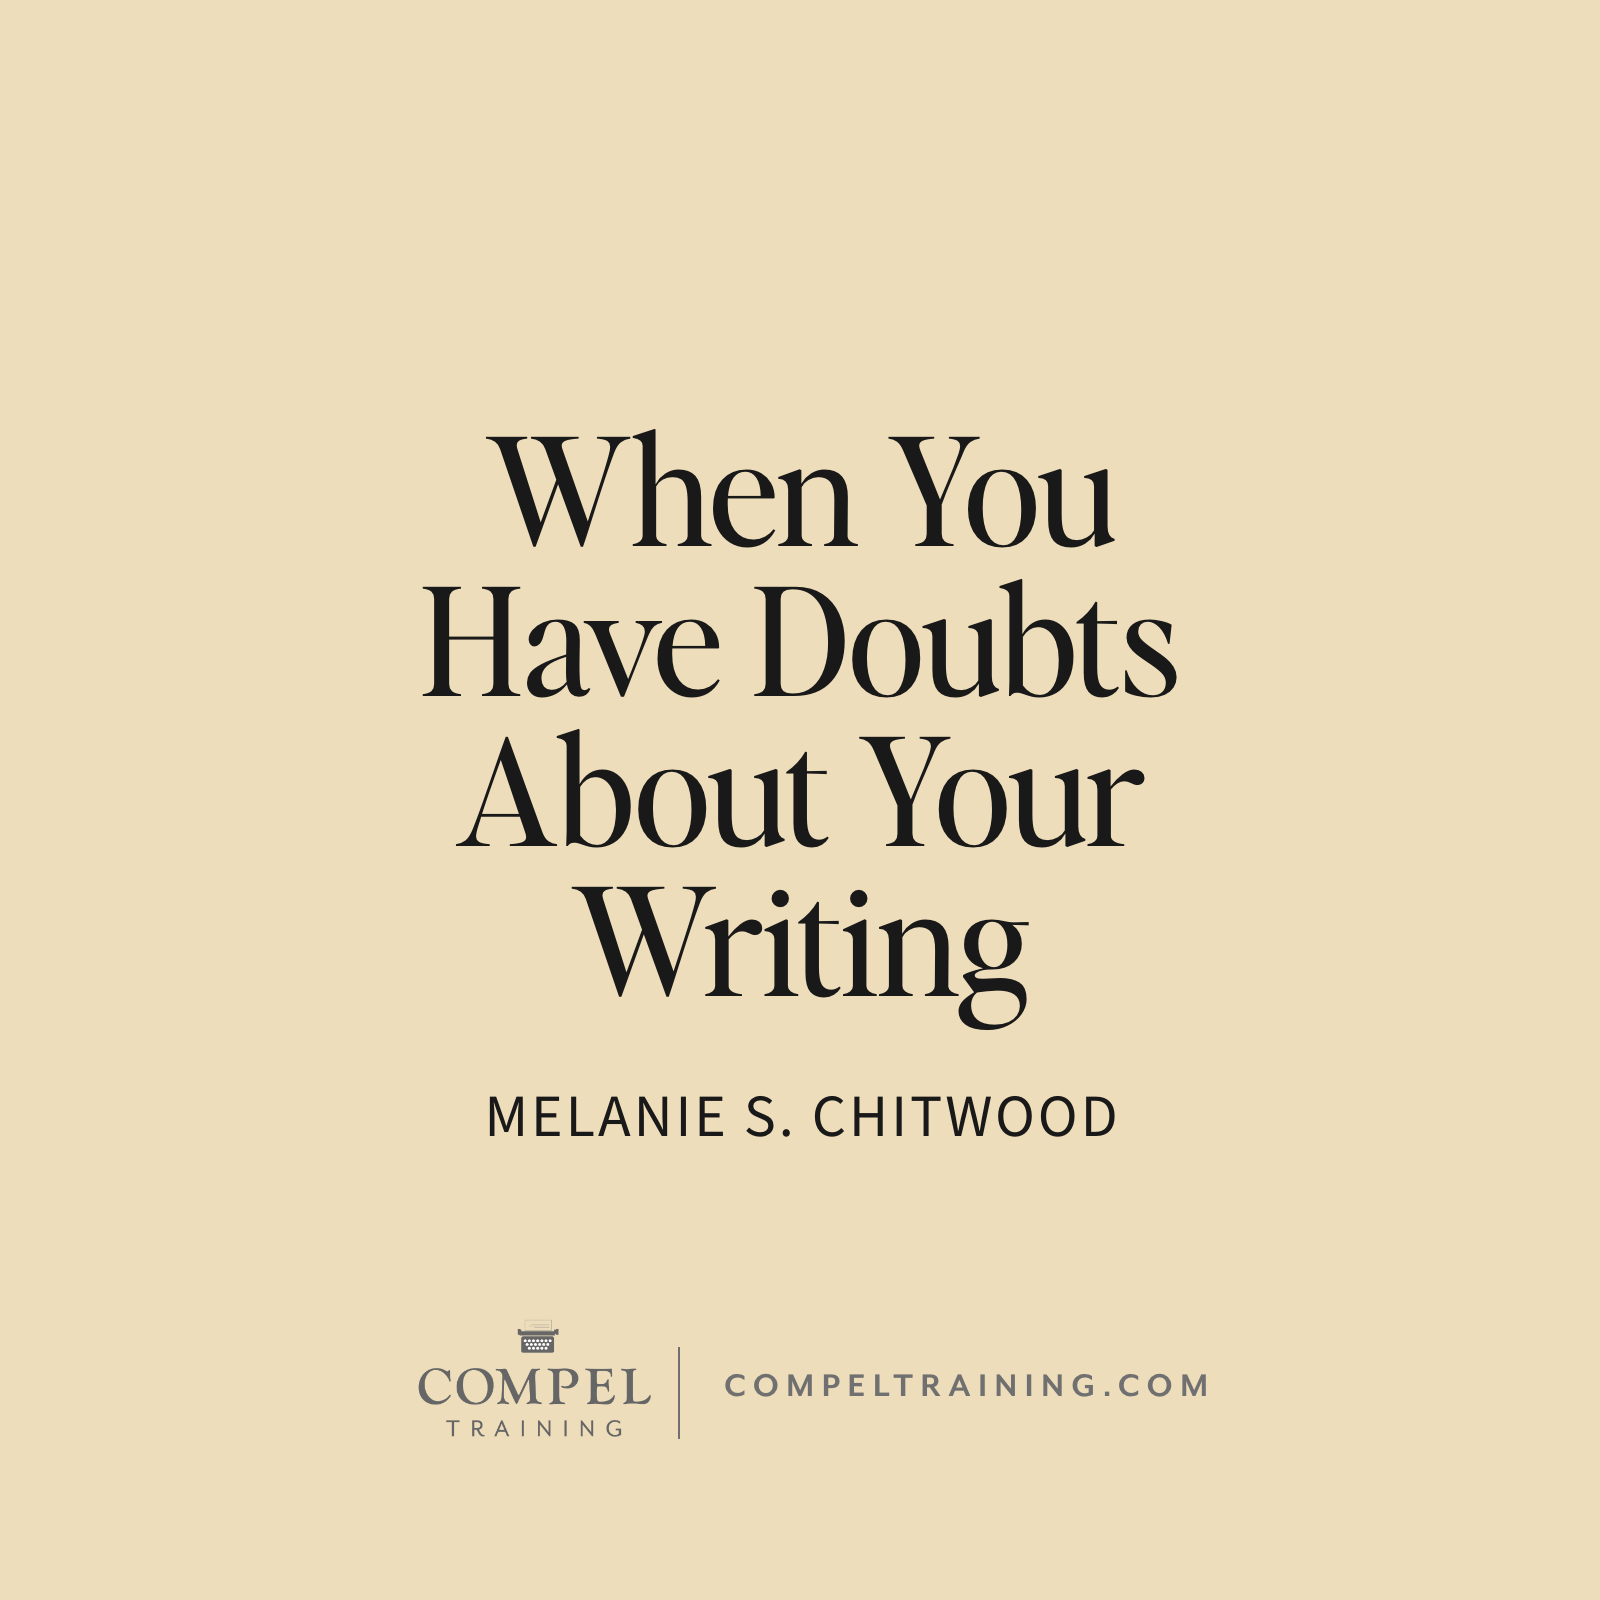 Doubt. As writers, we all experience moments of doubt. It can lead us down a rabbit hole of self-disappointment or leave us paralyzed with fear. It’s hard to write under that kind of pressure, but the wonderful news is we don’t have to! If you’ve ever doubted yourself and your ability to write, we encourage you to read on, friend.